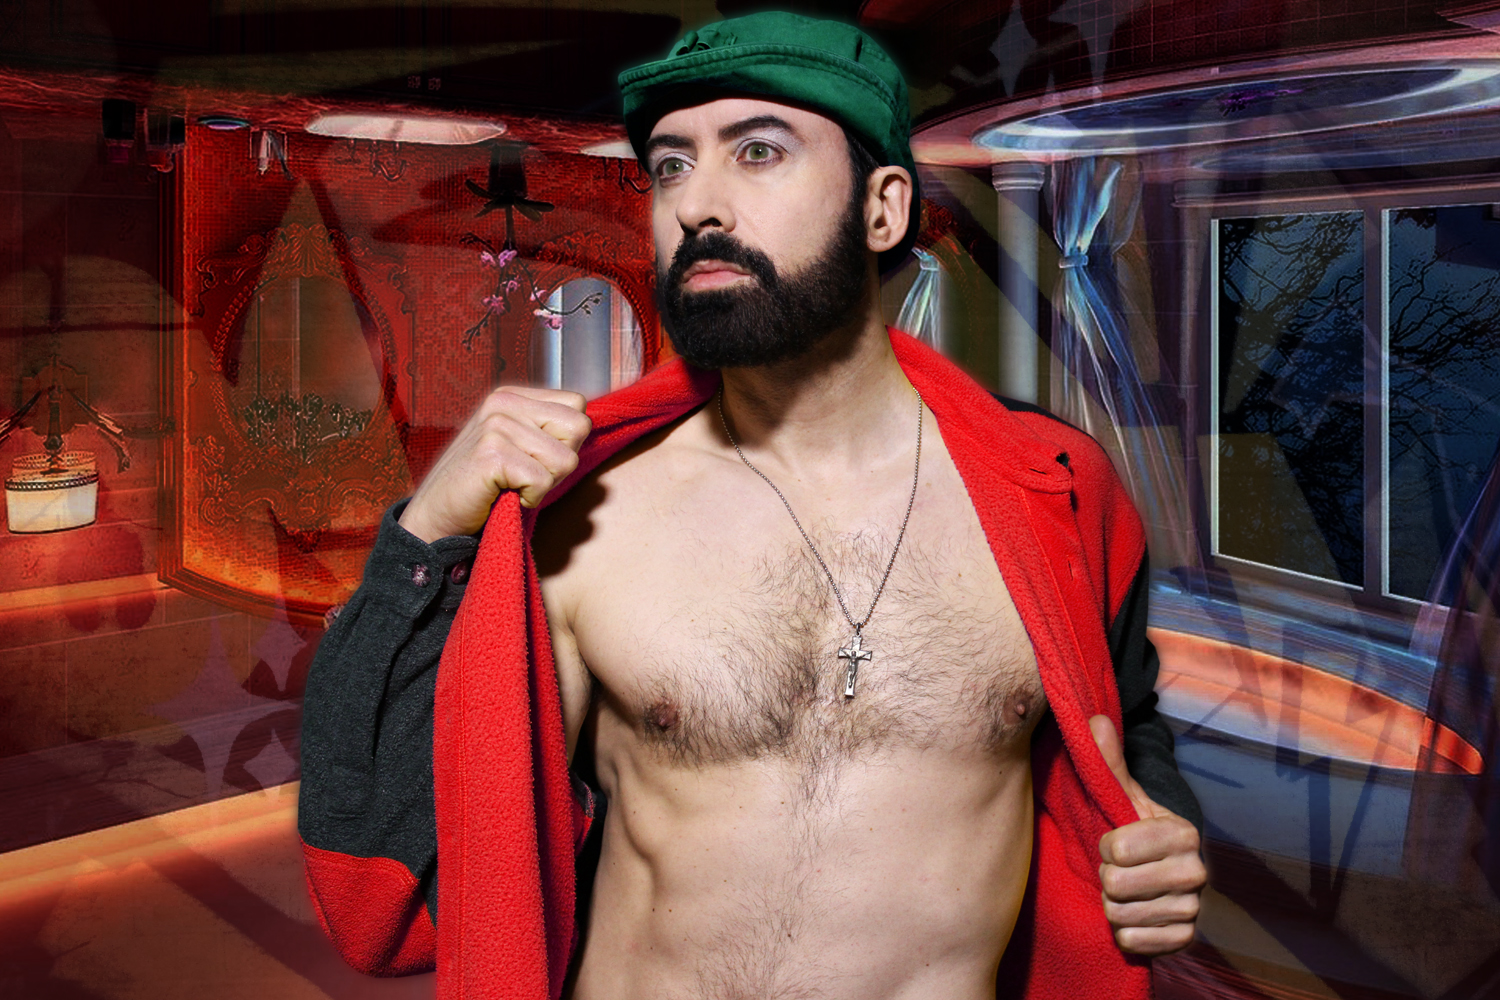 Displaced in #Time yet I will find my way back, eventually. Déplacé dans le #temps mais je vais retrouver mon chemin, éventuellement. #WorldAidsDay #Red #Beard #MoonDazeTV #LifeIsGood